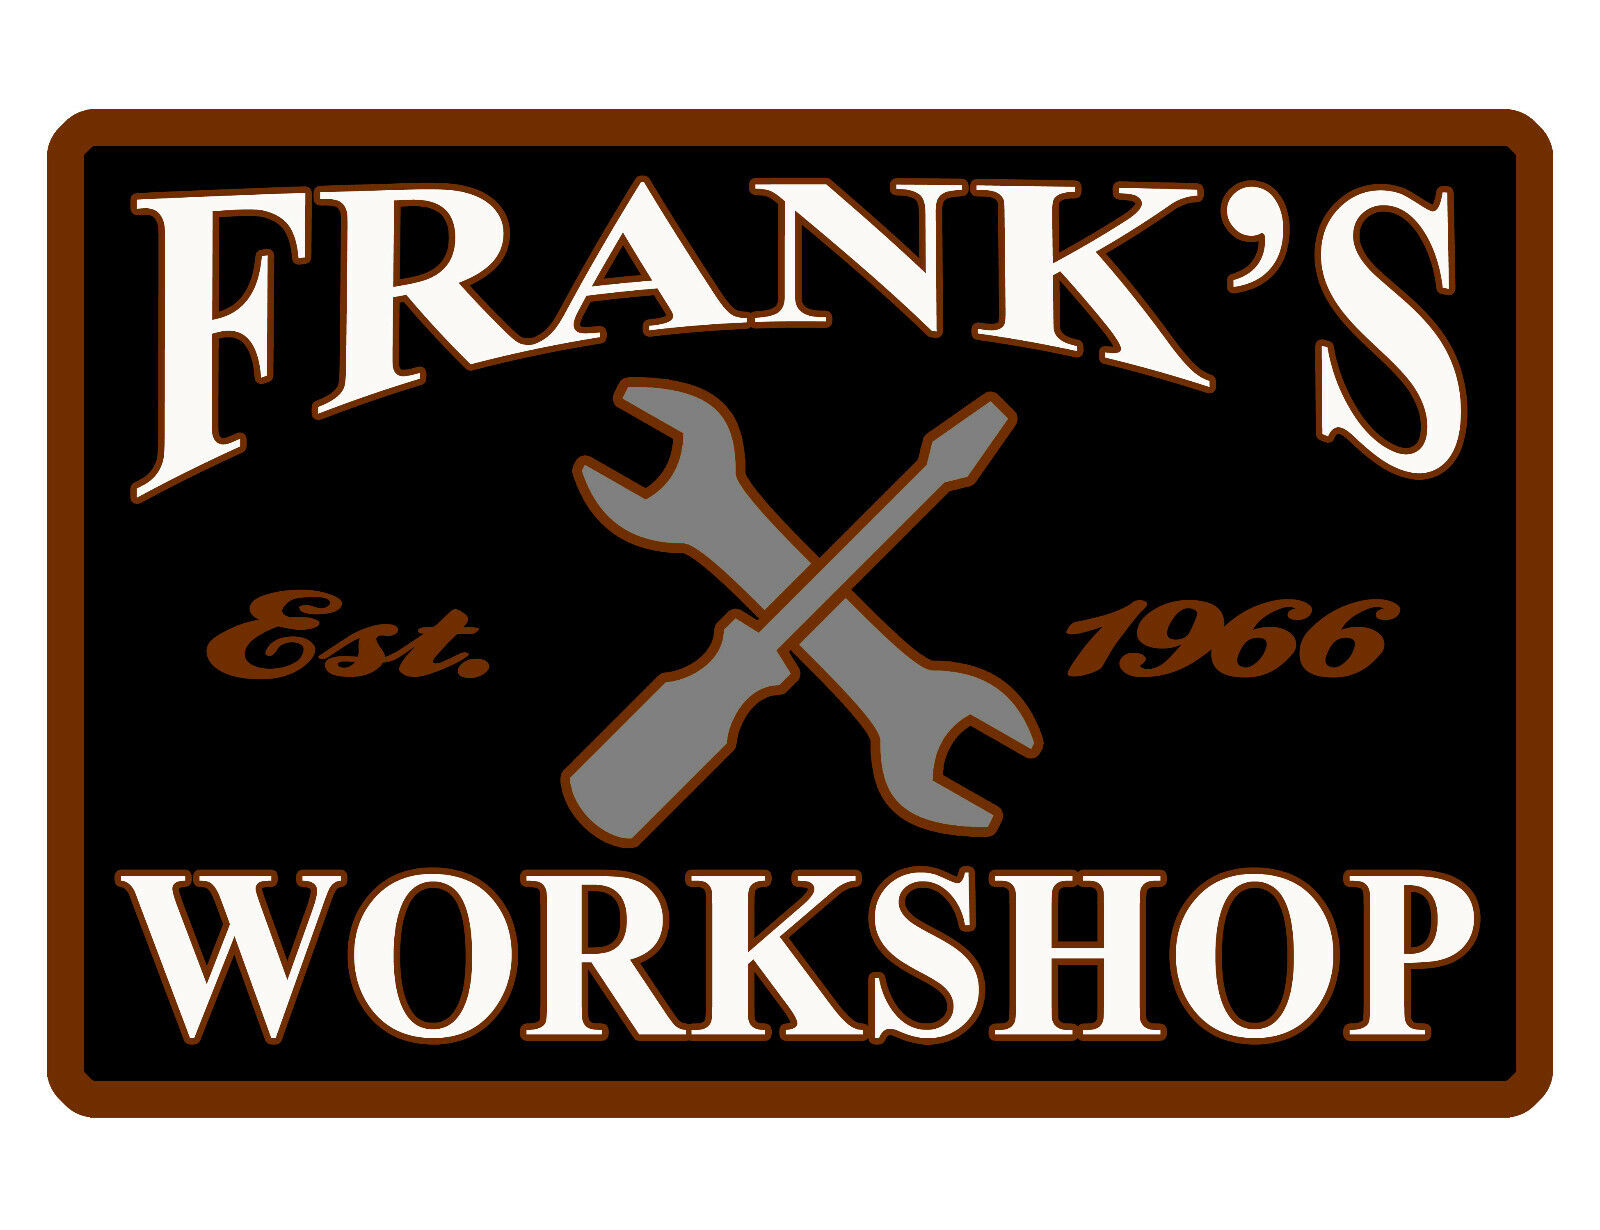 Personalized WORKSHOP SIGN *YOUR NAME and DATE* DURABLE Aluminum HIGH GLOSS B626